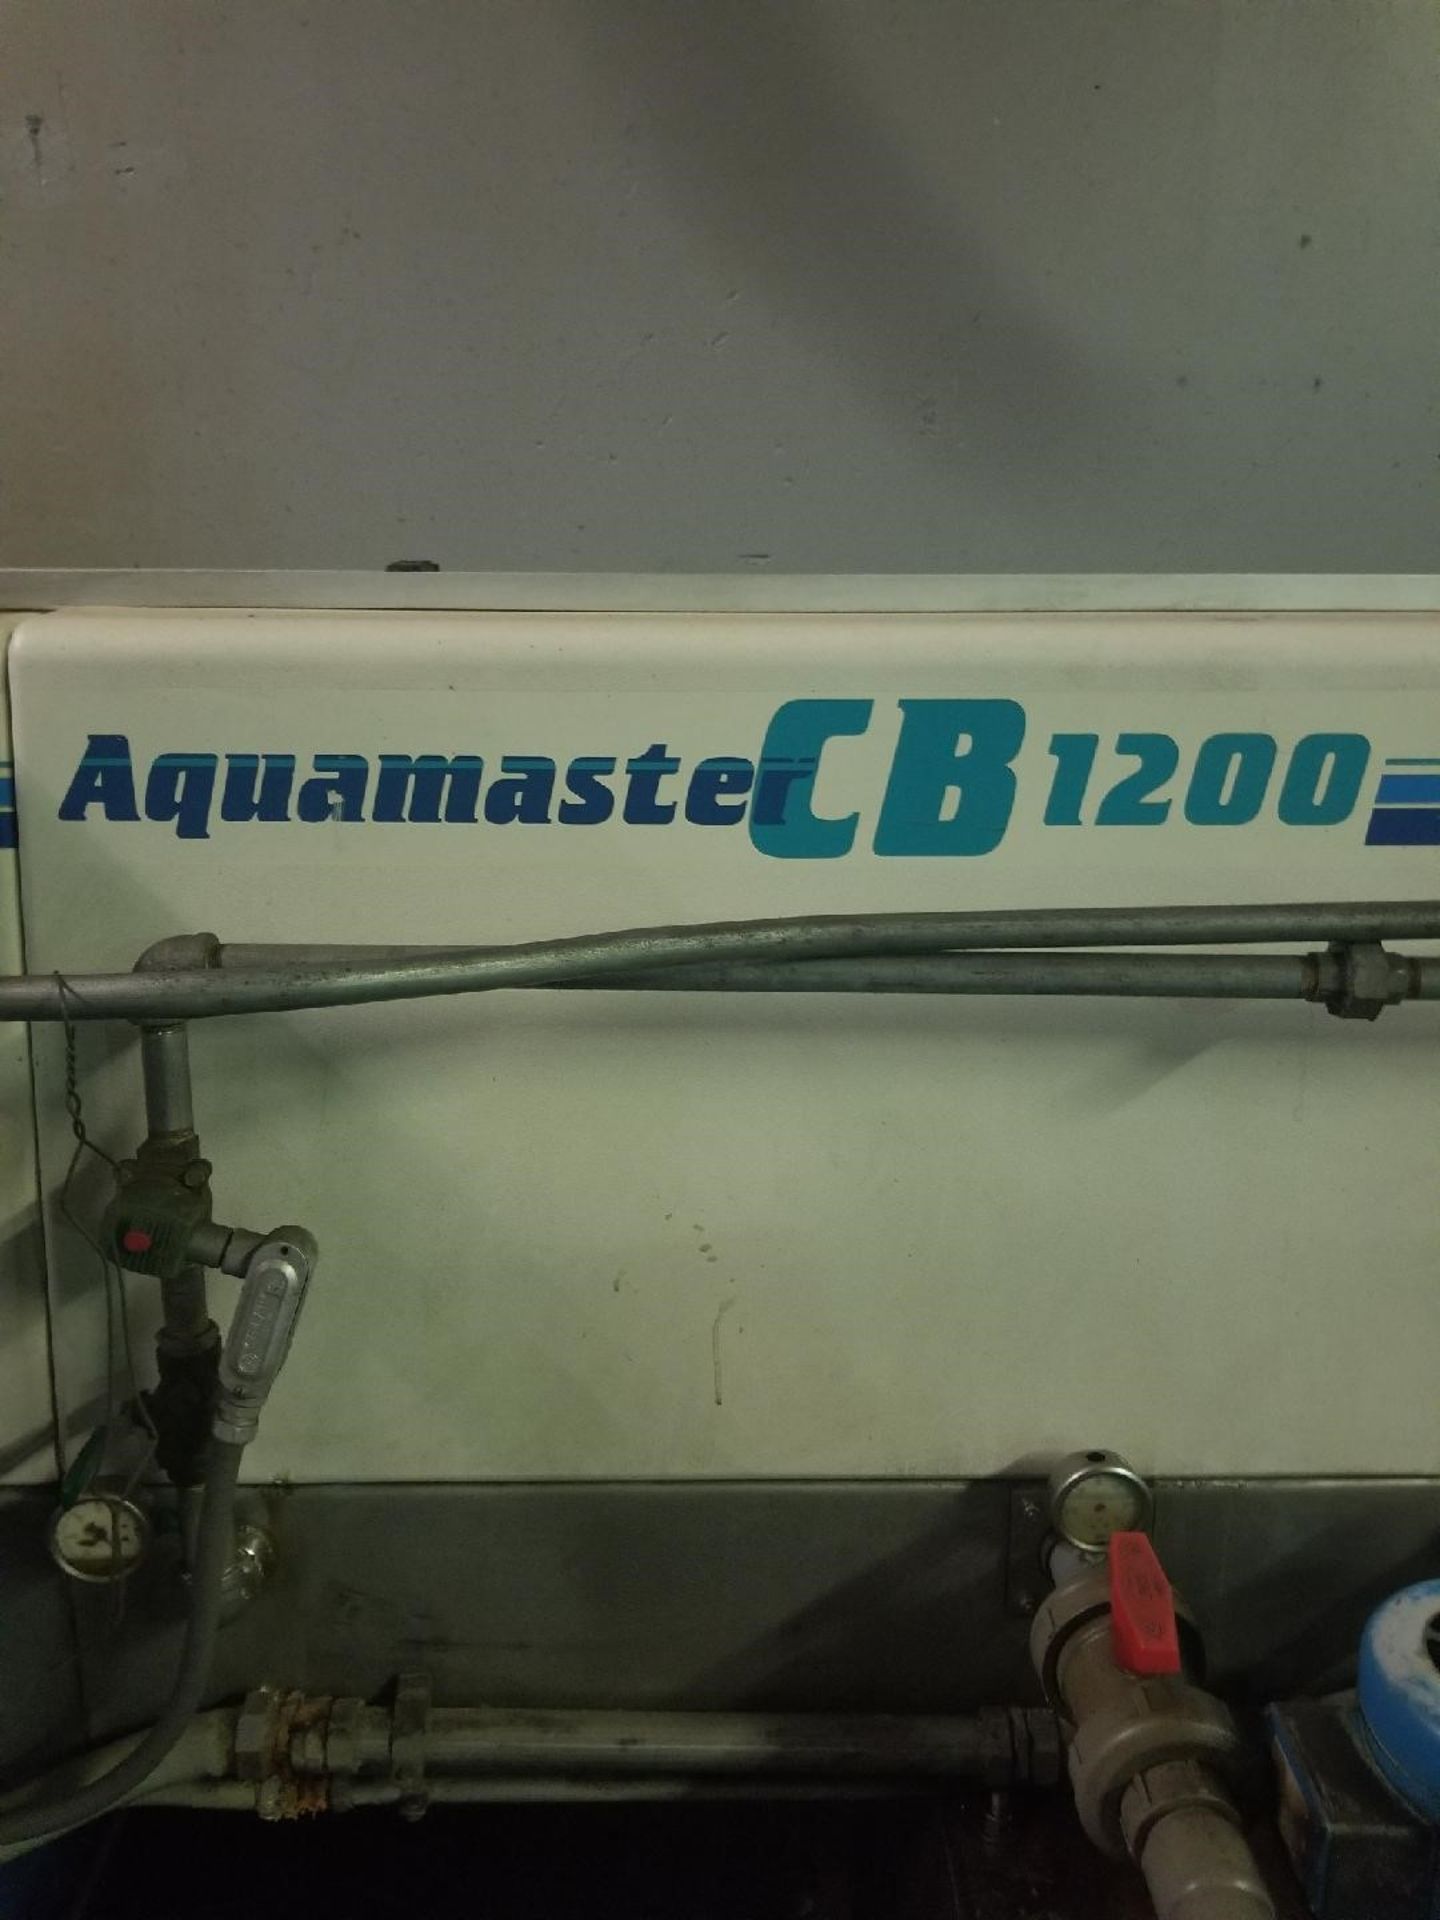 **12" WIDE ALLIANCE AQUAMASTER MODEL CB-1200 TWO-STAGE PARTS WASHER; S/N 062-0897 - Image 5 of 6